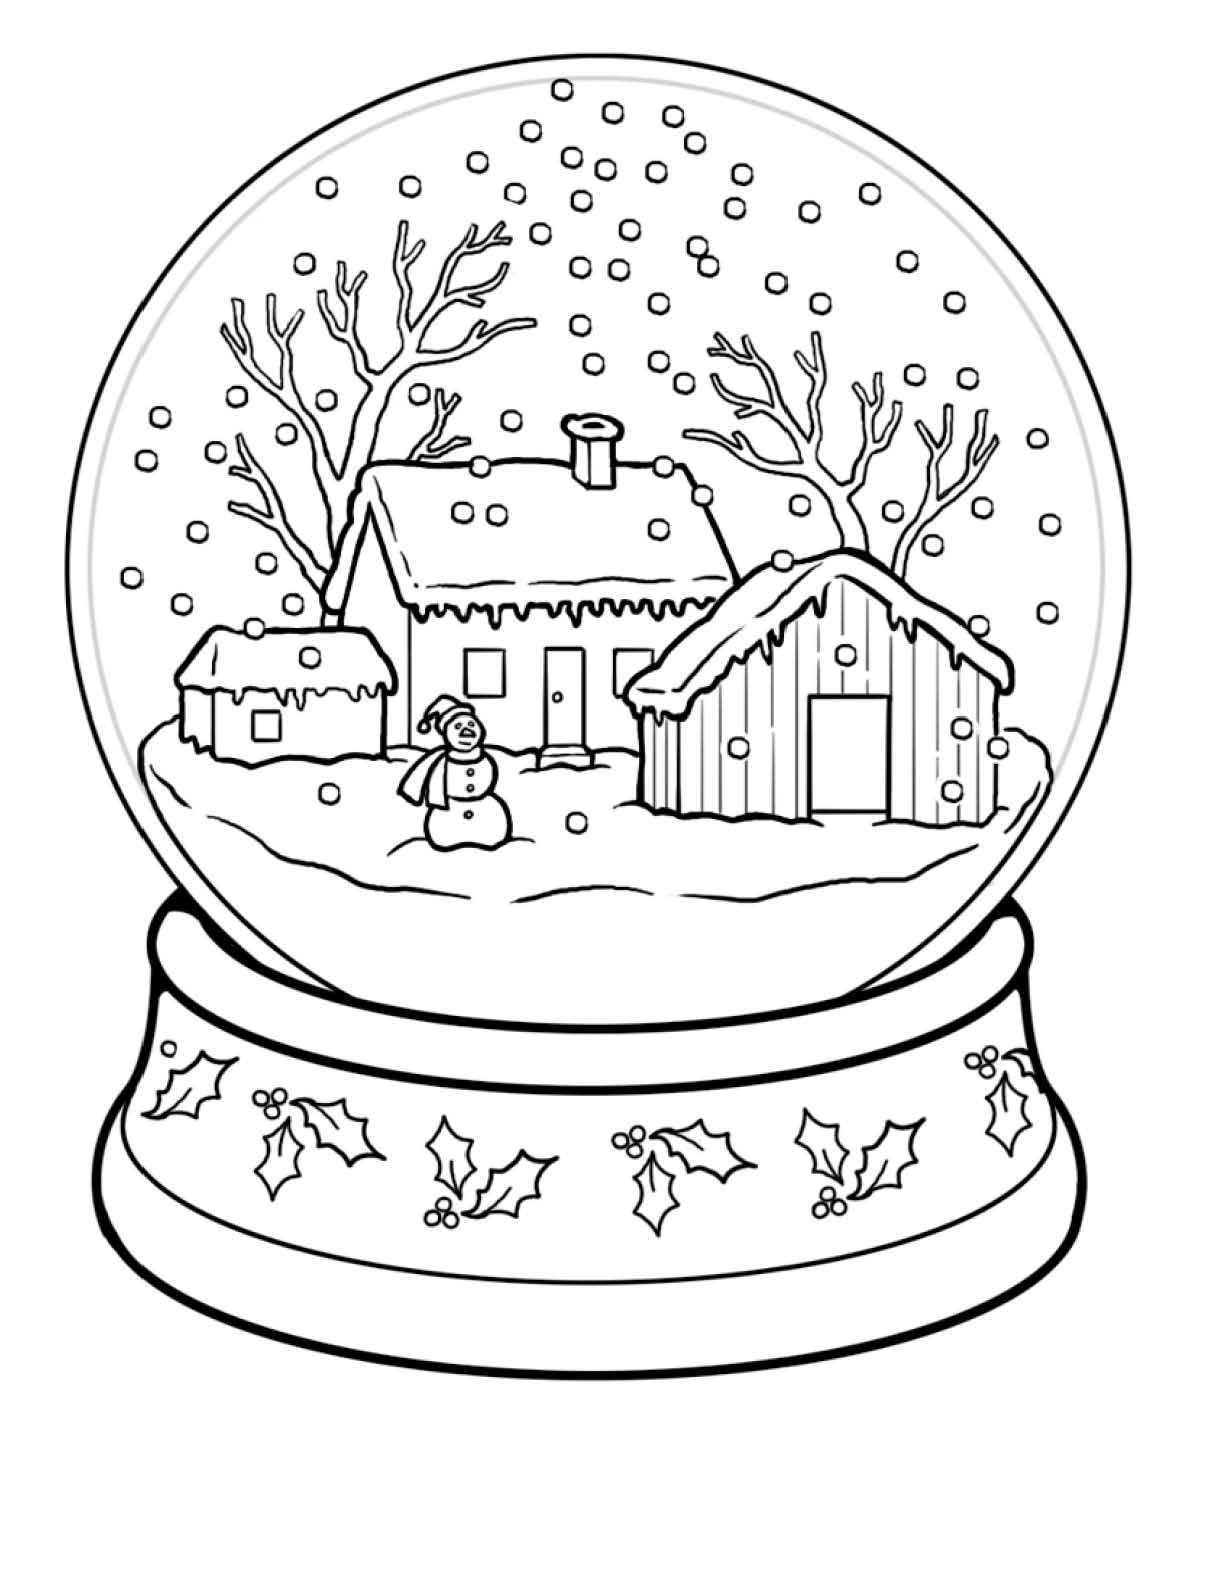 january coloring pages for adults - photo #8